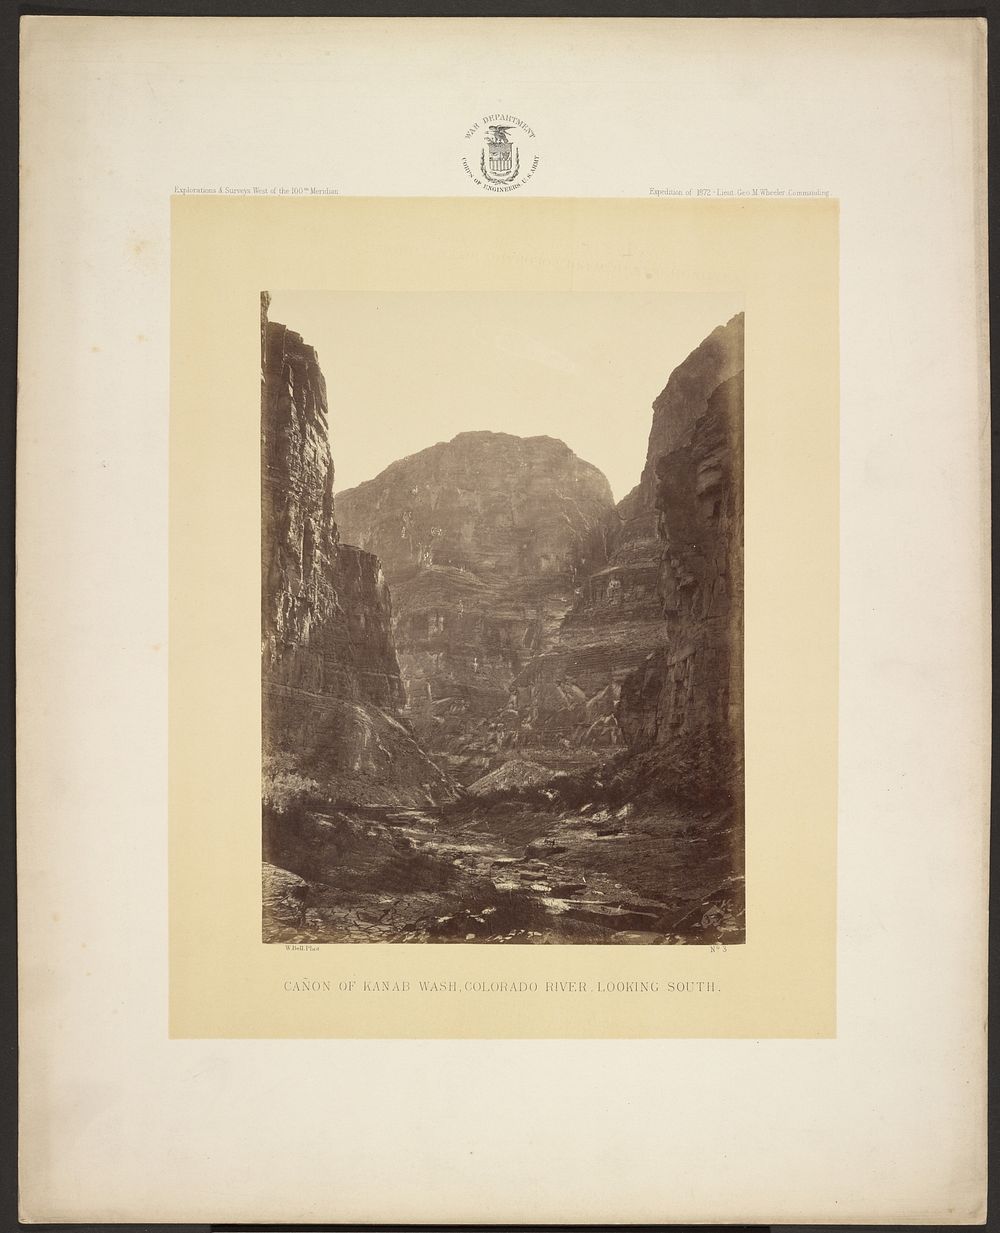 Cañon of Kanab Wash, Colorado River, Looking South by William H Bell